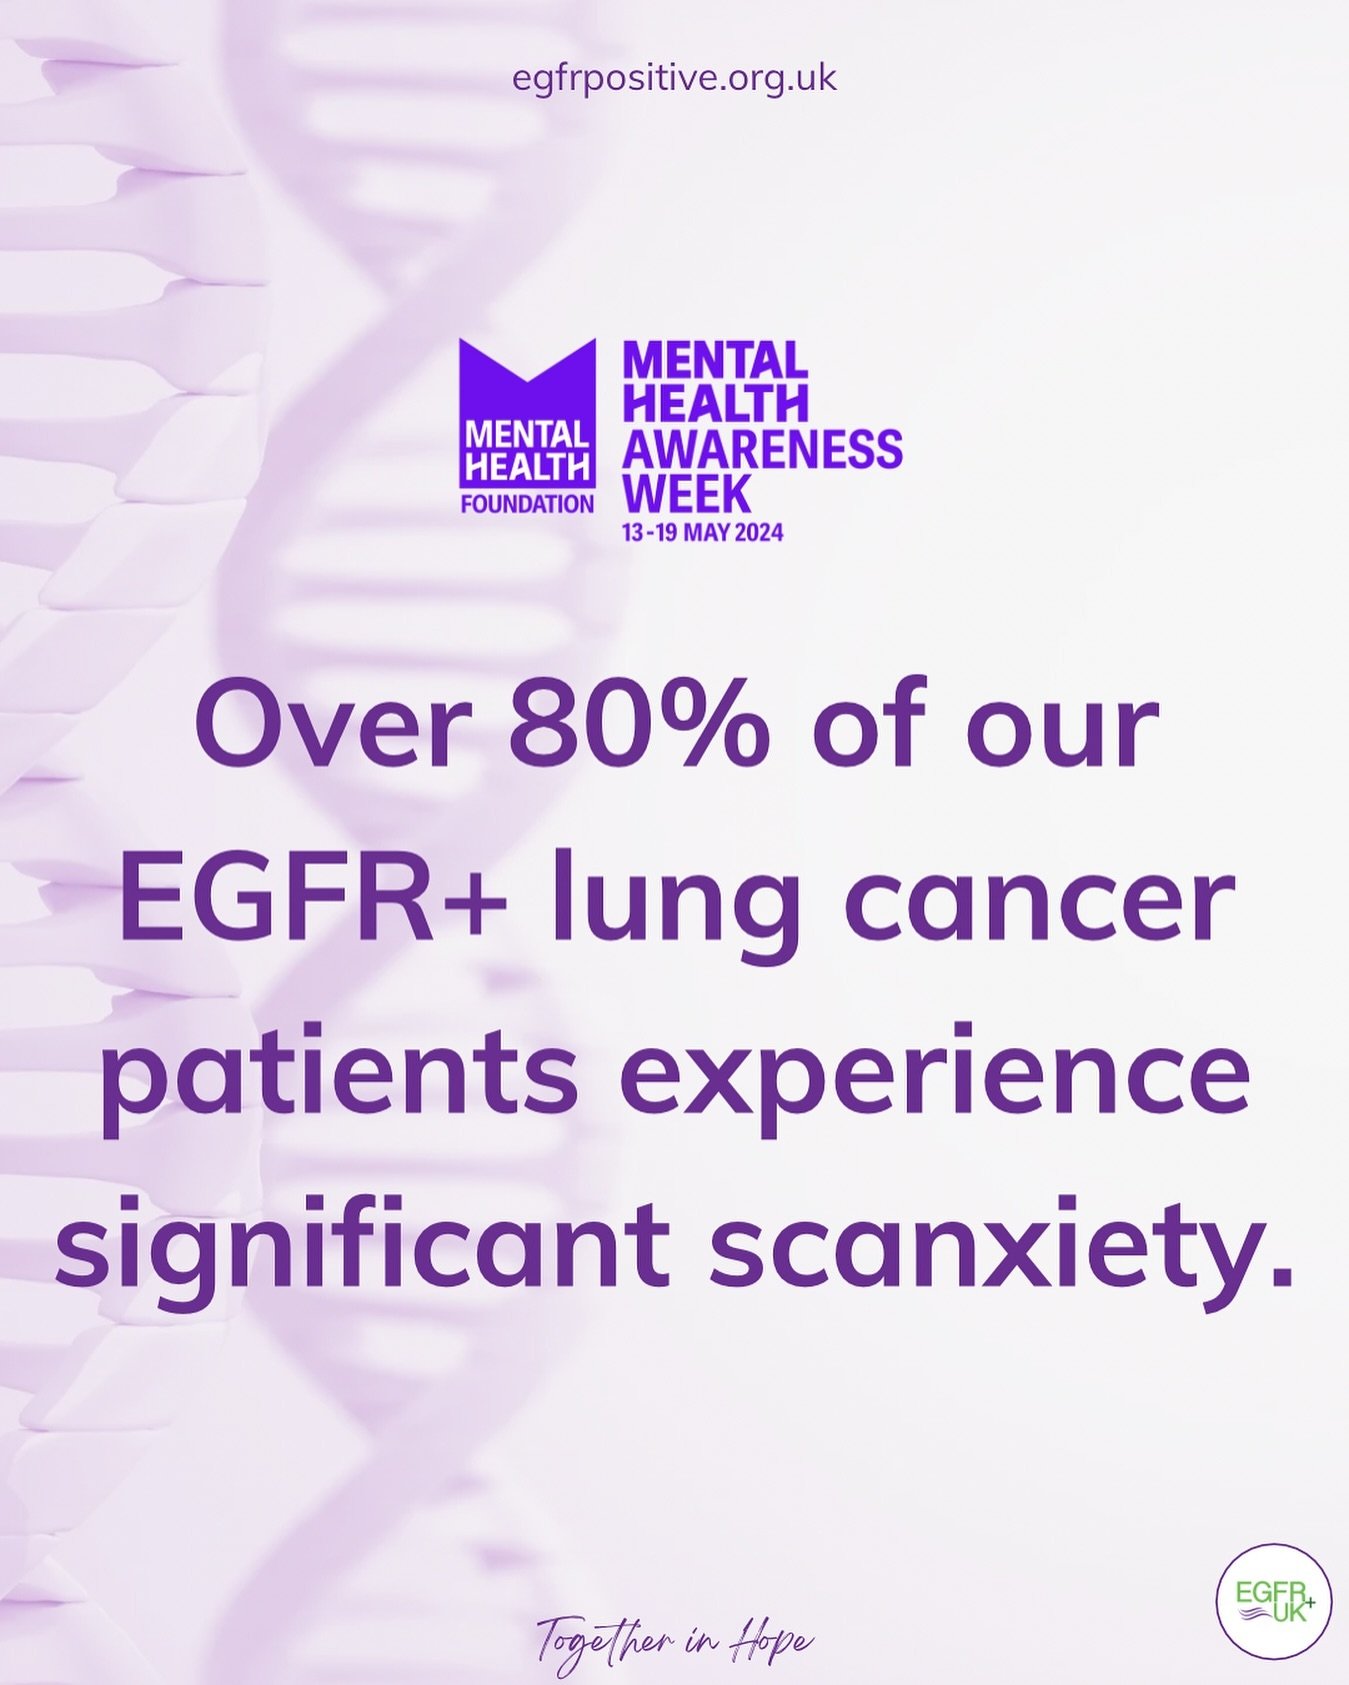 EGFR+ UK has conducted the largest survey focused on the experiences and needs of UK patients with EGFR+ lung cancer. 

With record participation from 234 members of our support group, this study has provided profound insights, including:

&rarr; 53.